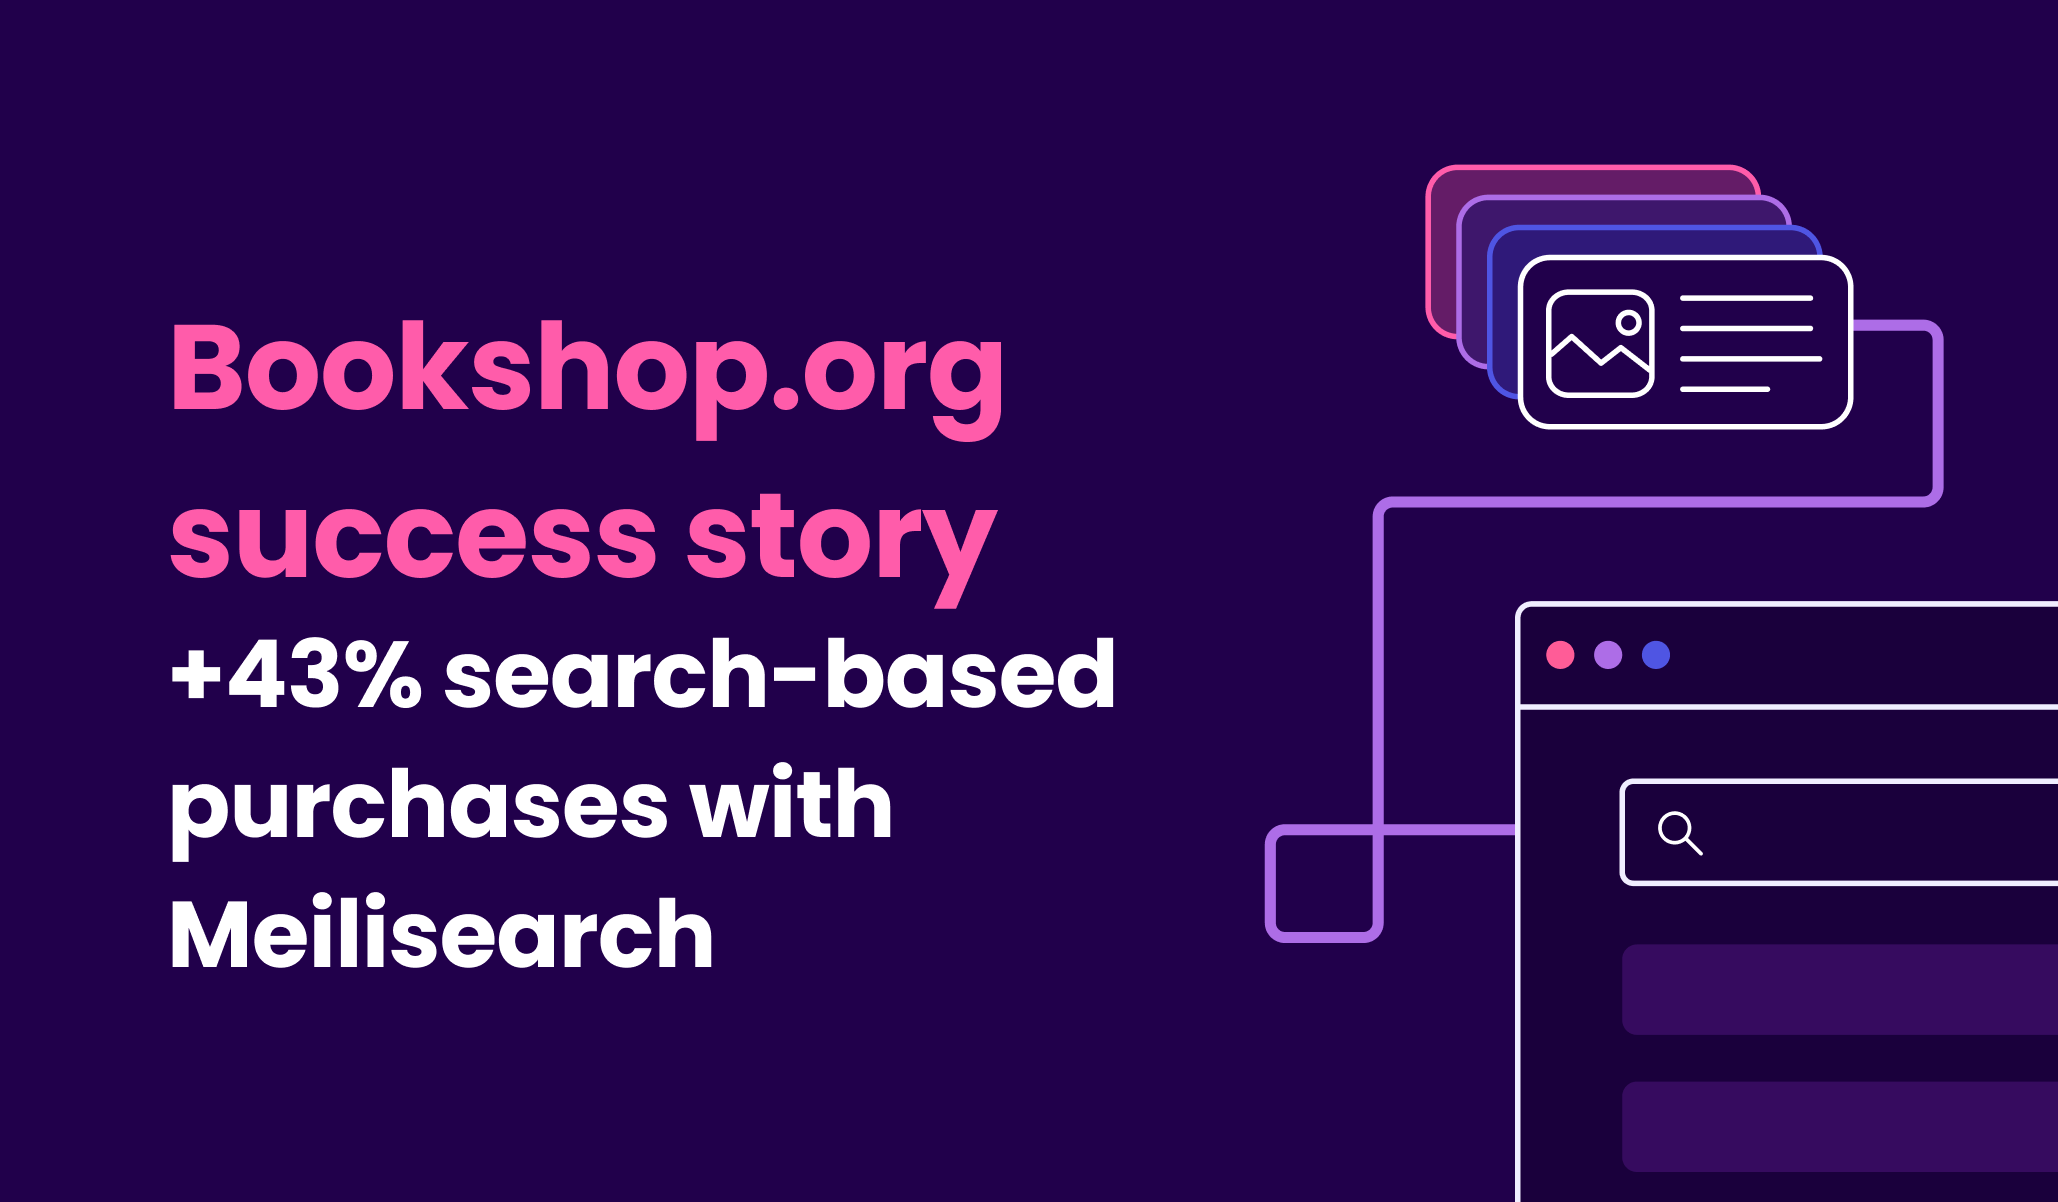 Bookshop.org increases search-based purchases by 43% with Meilisearch